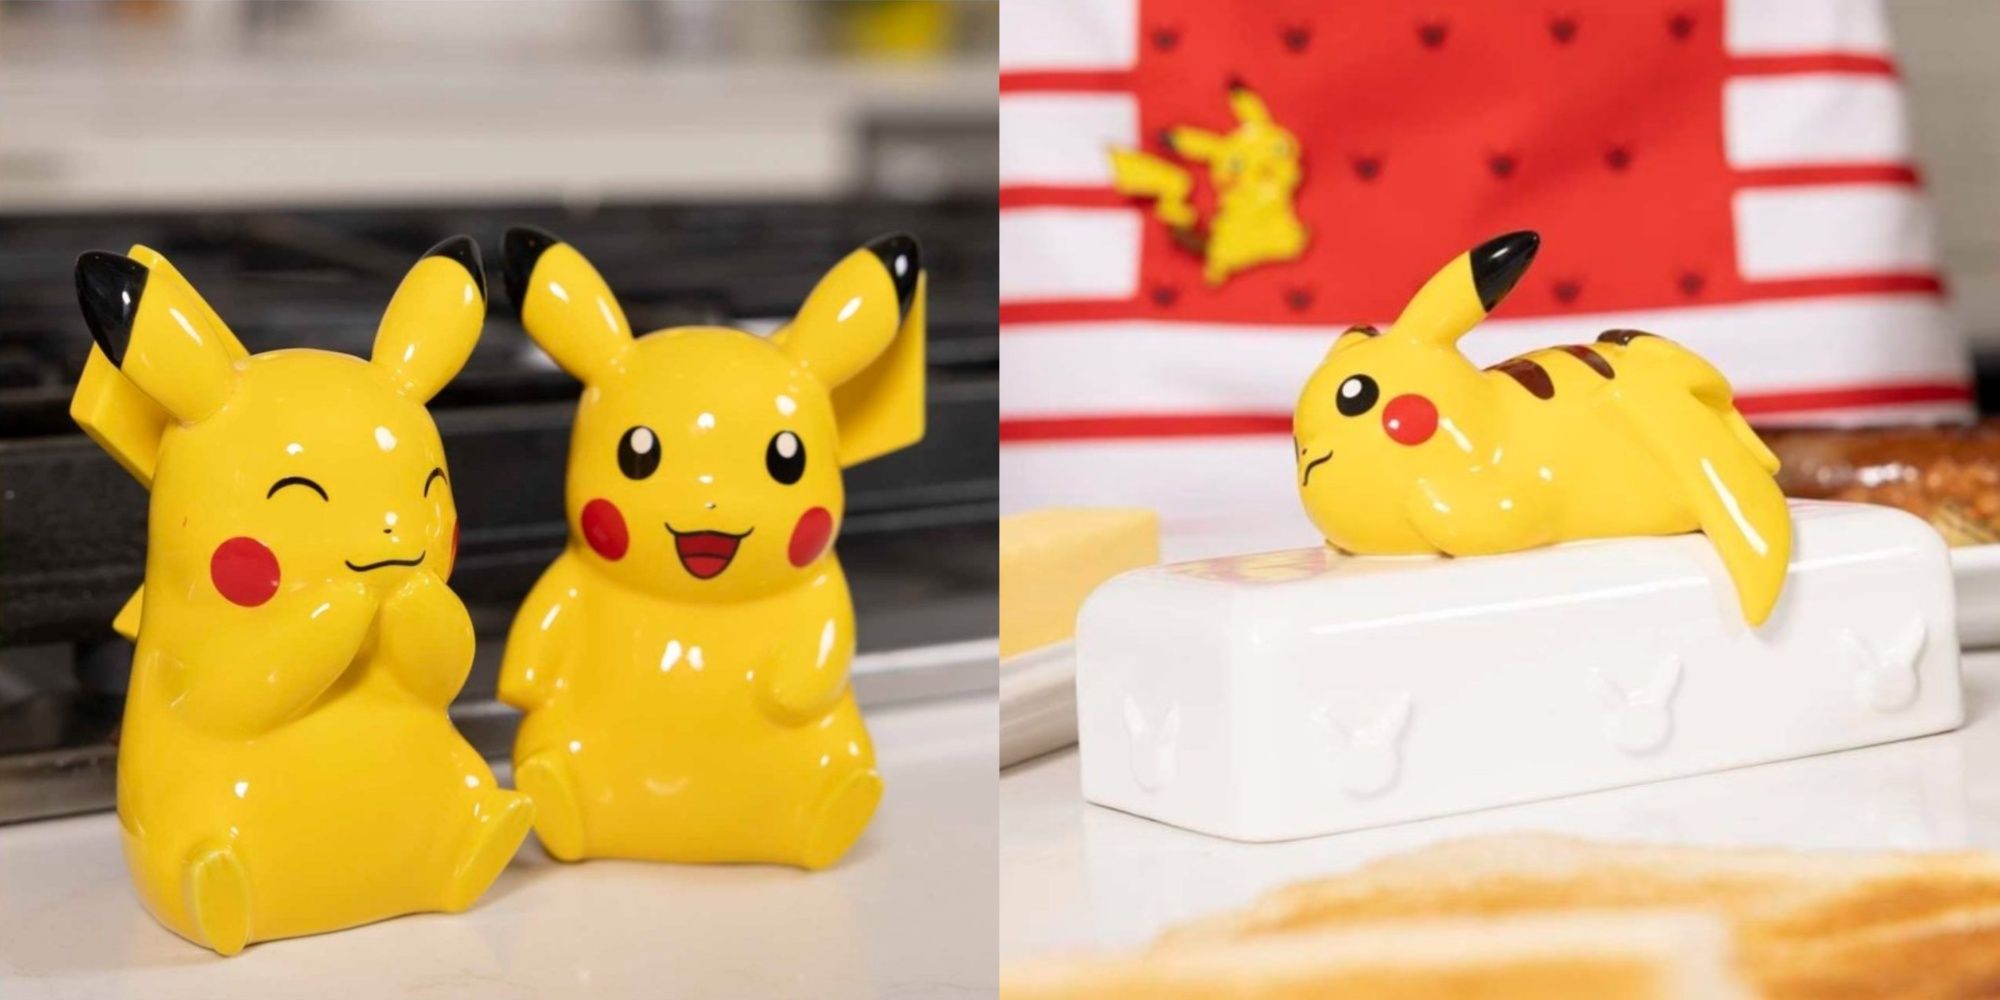 pokemon's pikachu salt and pepper shakers and butter dish